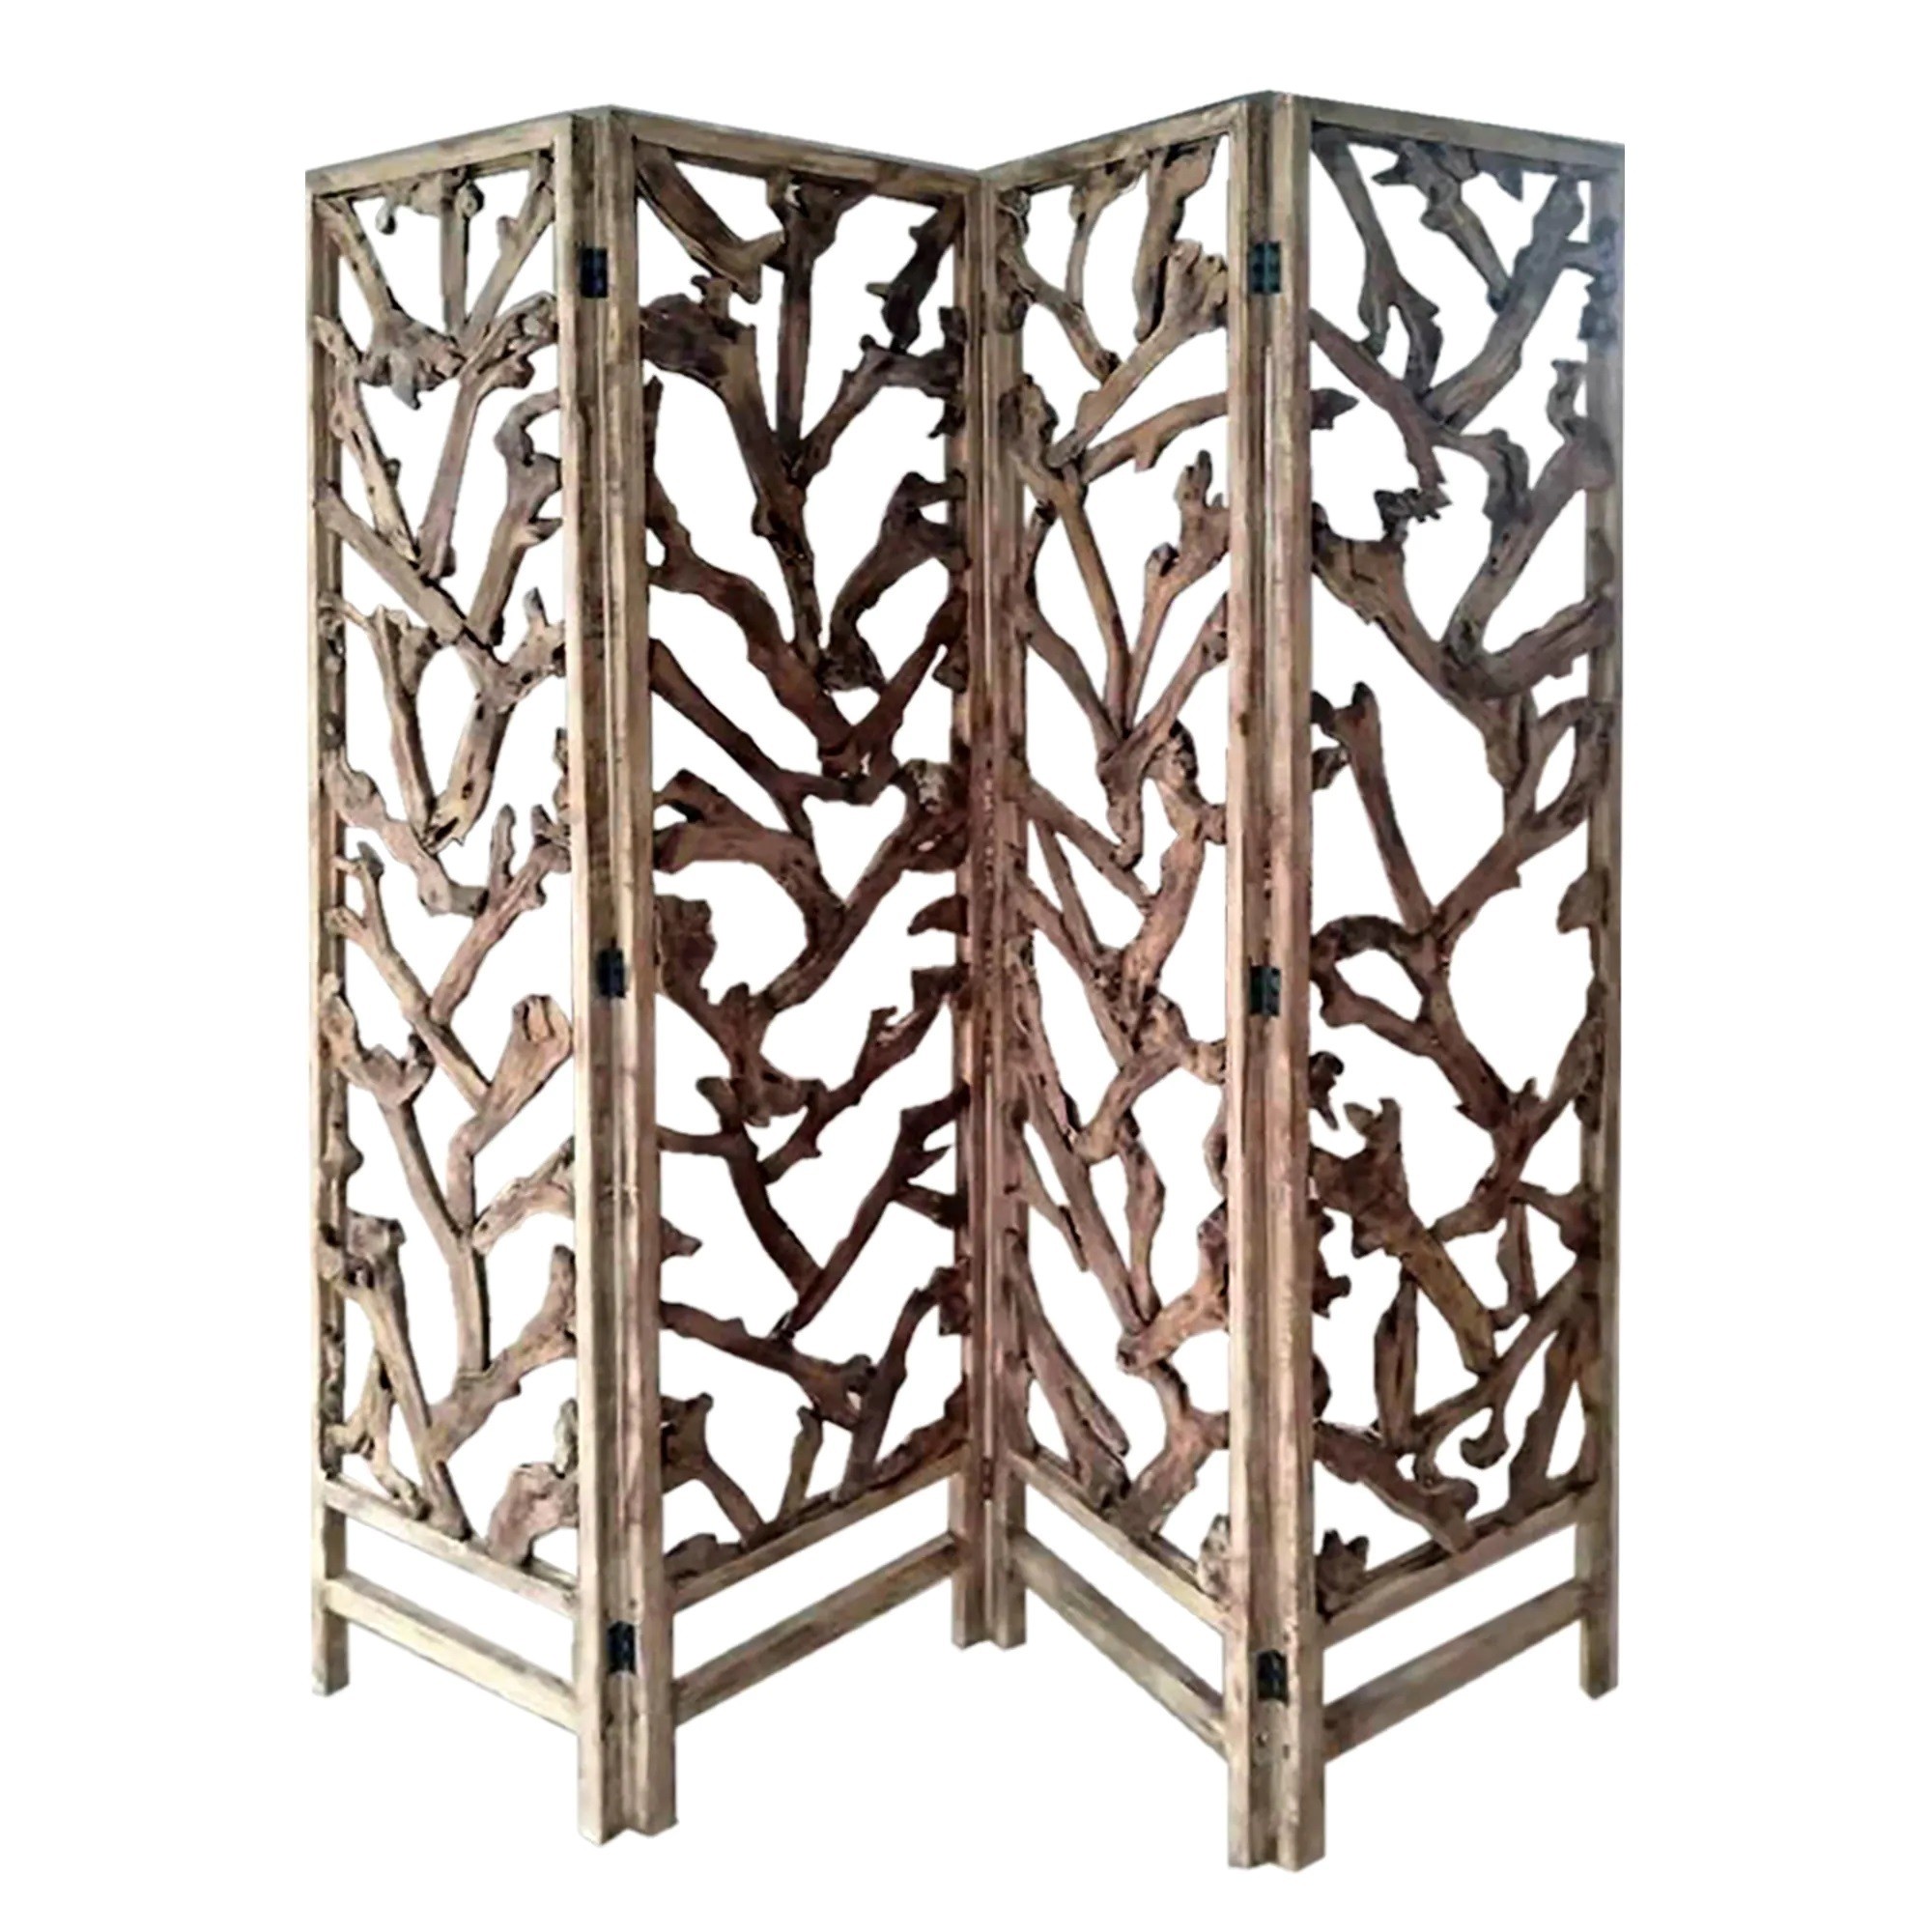 Indoor decorative screen panel with a natural feel